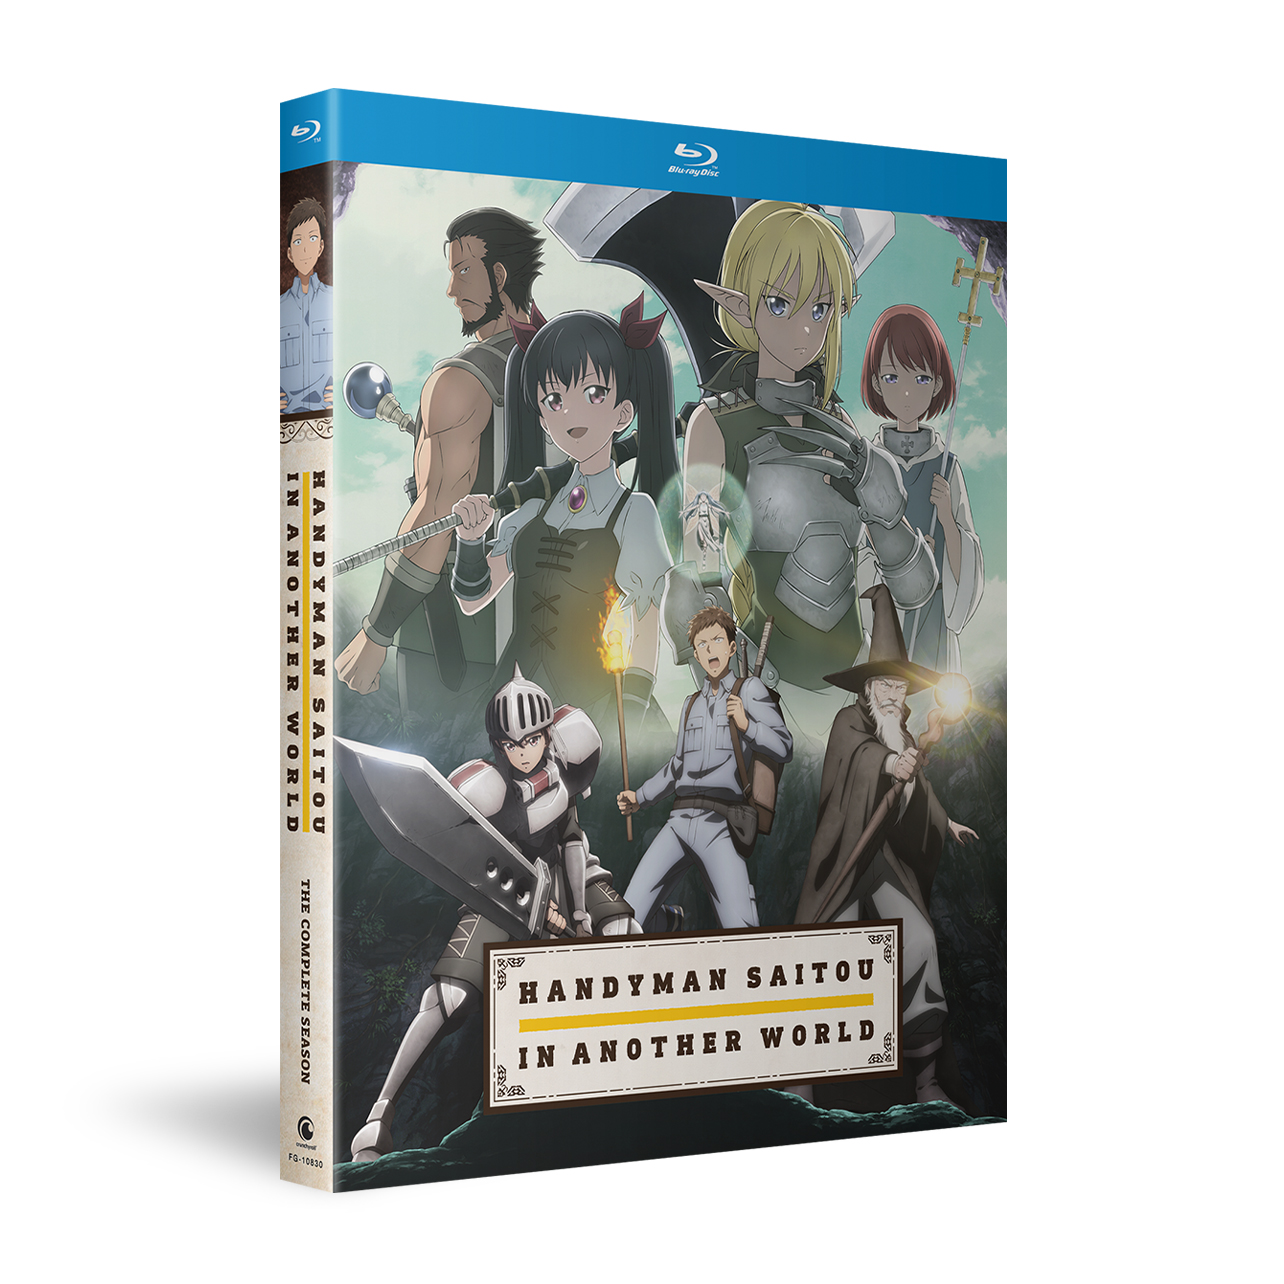 Handyman Saitou in Another World - The Complete Season - Blu-ray image count 1